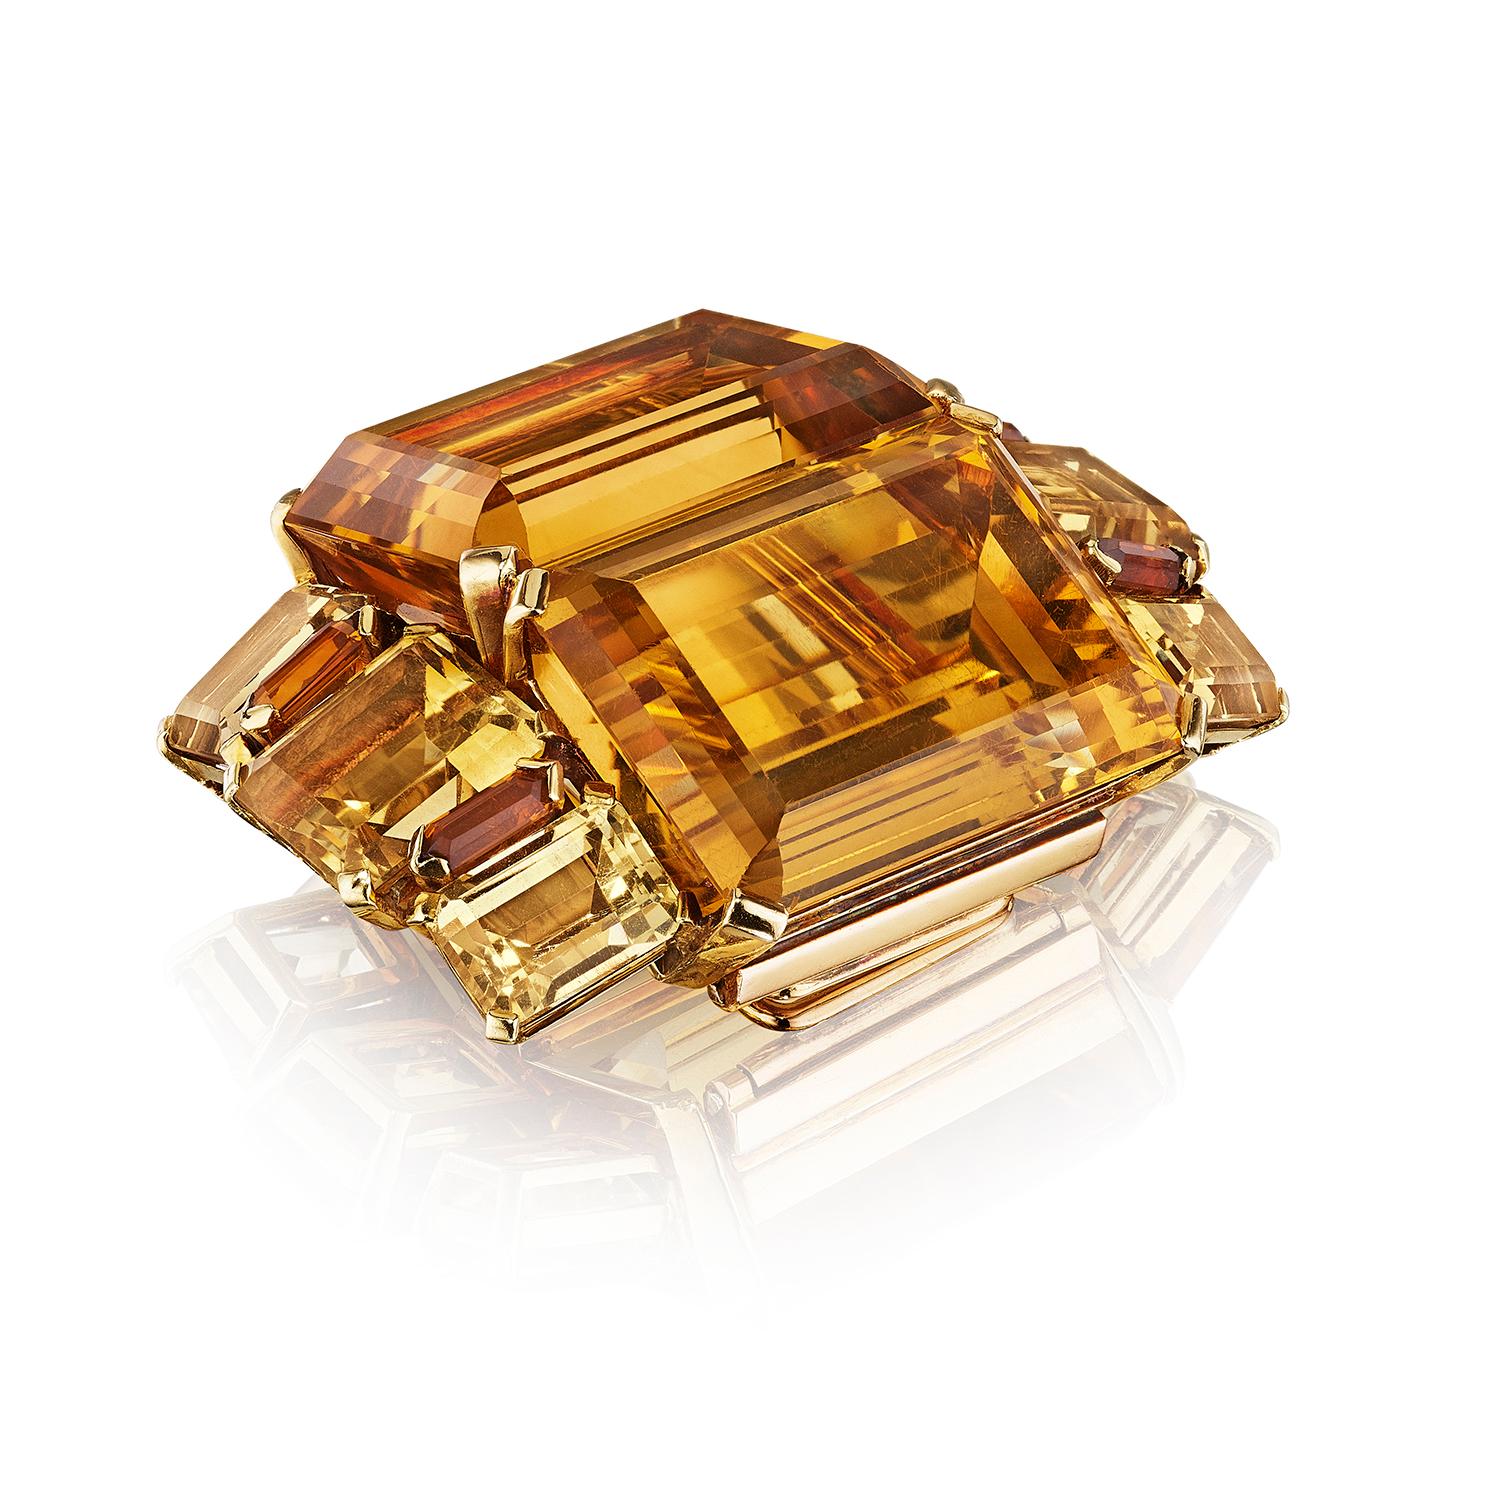 Art Moderne Citrine Brooch by Suzanne Belperron for René Boivin, Paris, 1933
A brooch composed of step-cut and baguette-cut citrines; mounted in gold, with French assay marks
• 12 step-cut and baguette citrines 
• Maker’s mark for René Boivin 
•